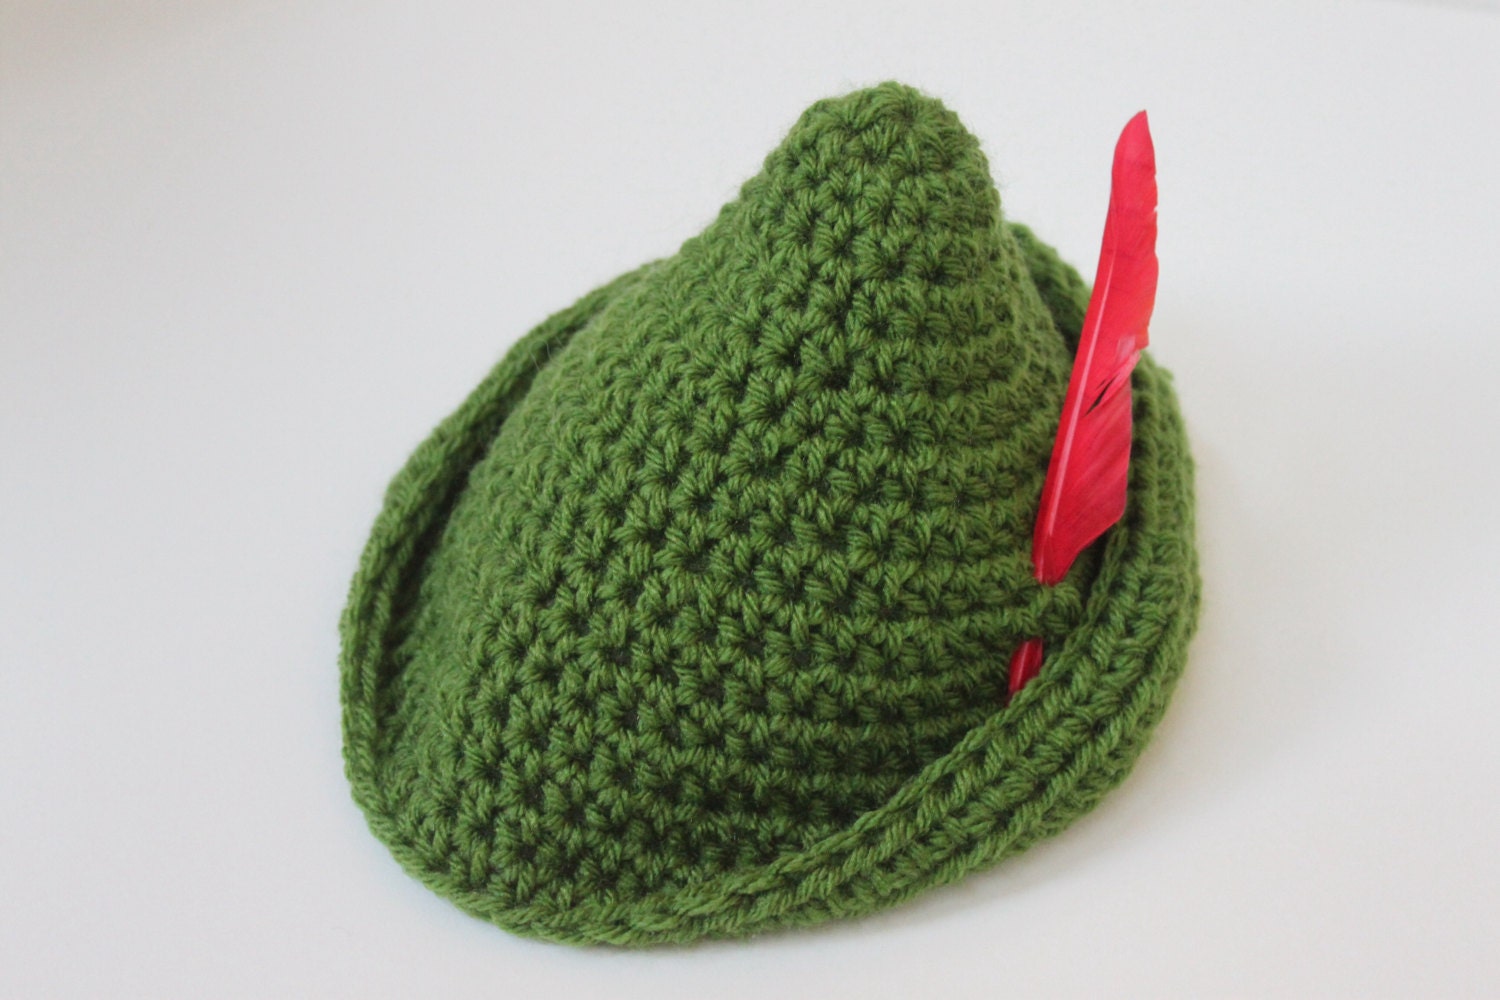  Peter Pan Hat Robin Hood Hat Pointed Elf Hat with Feather